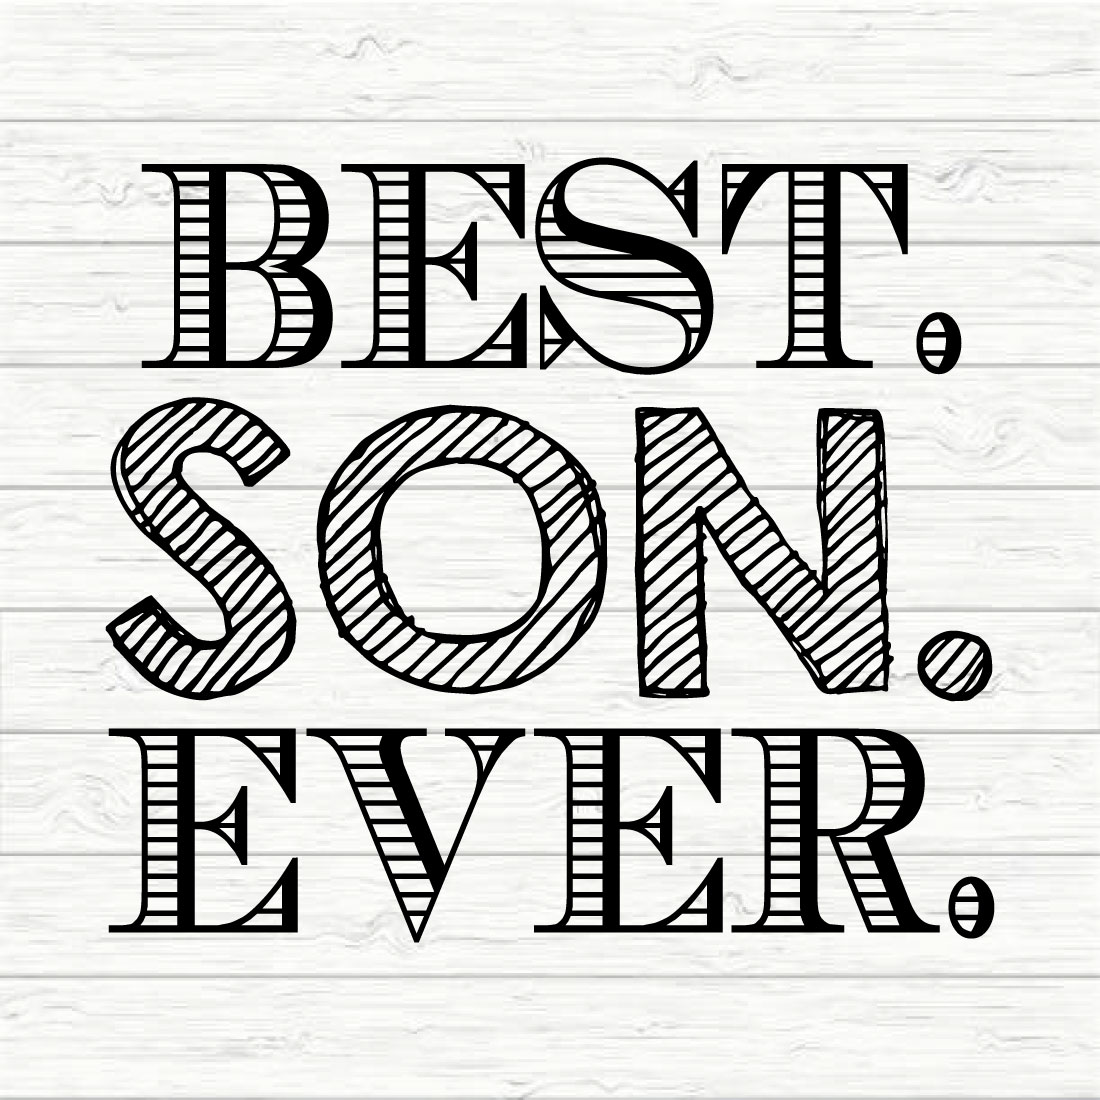 Best son ever preview image.